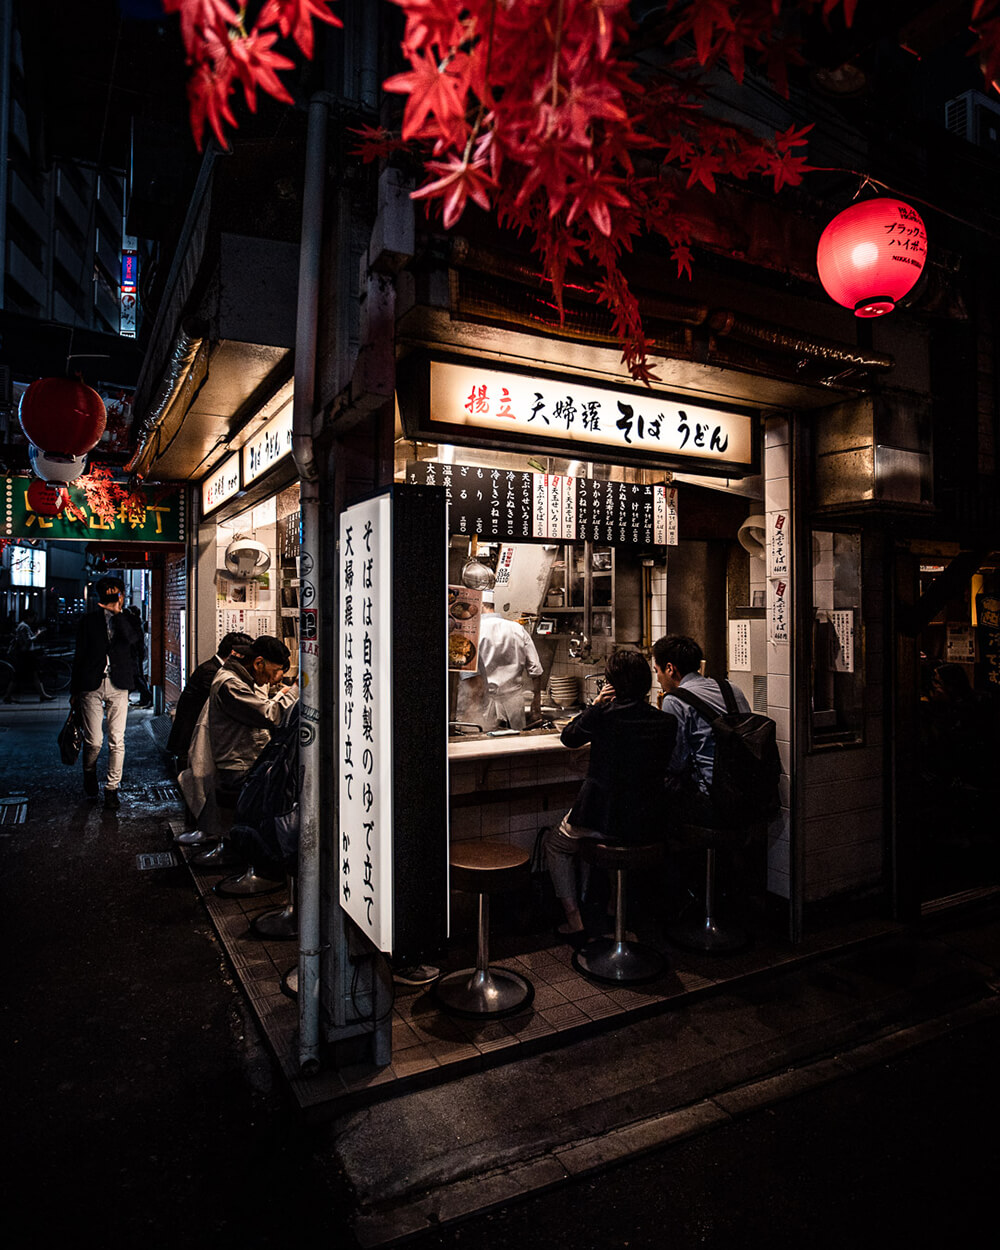 Low light image of night store with higher exposure by Julian Lallo